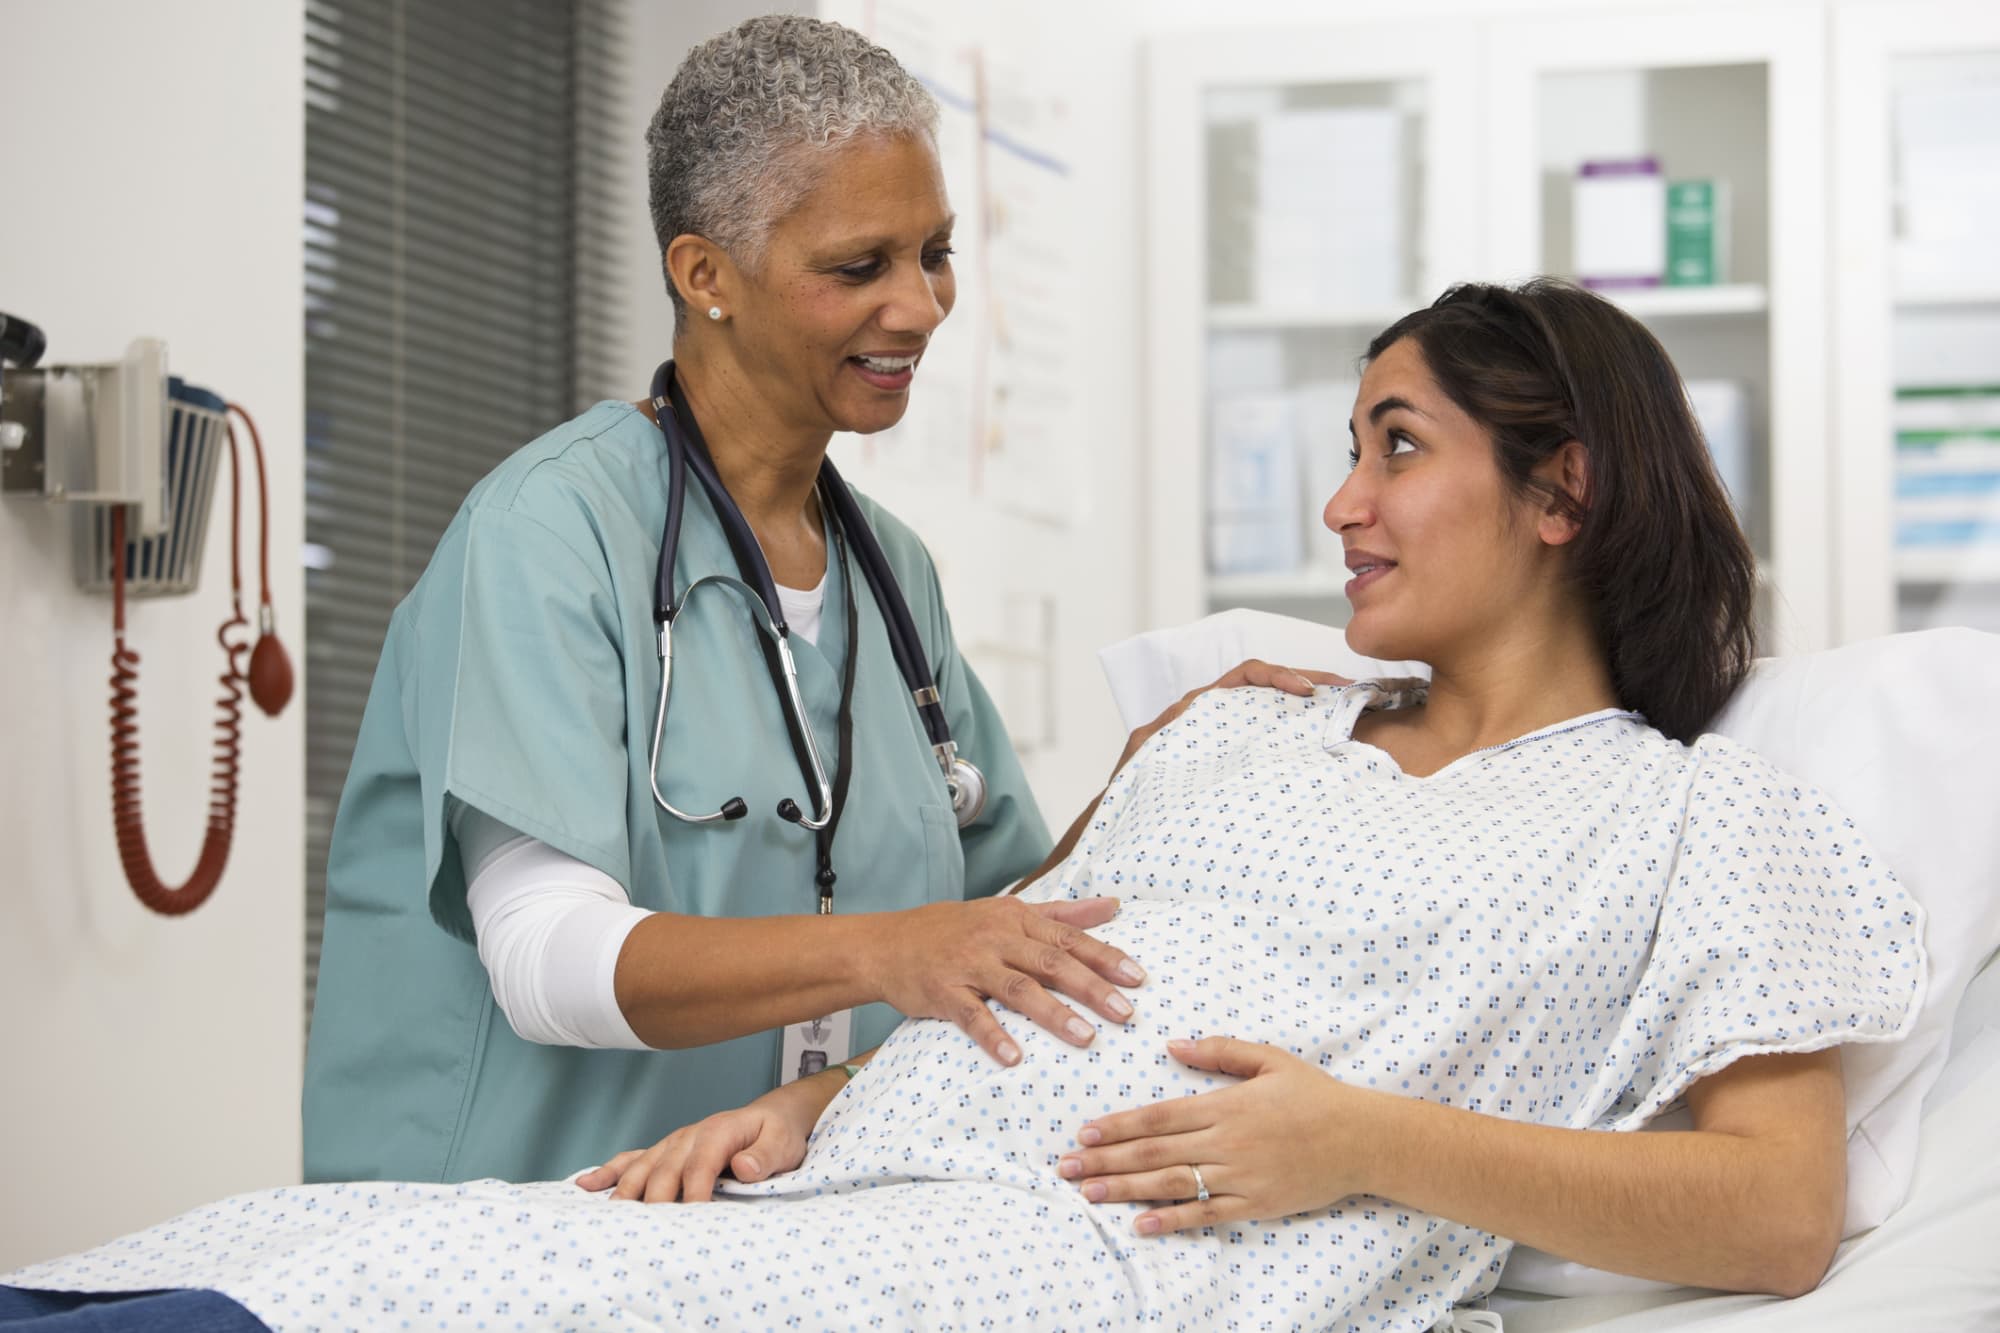 How Much Do Labor and Delivery Nurses Make?